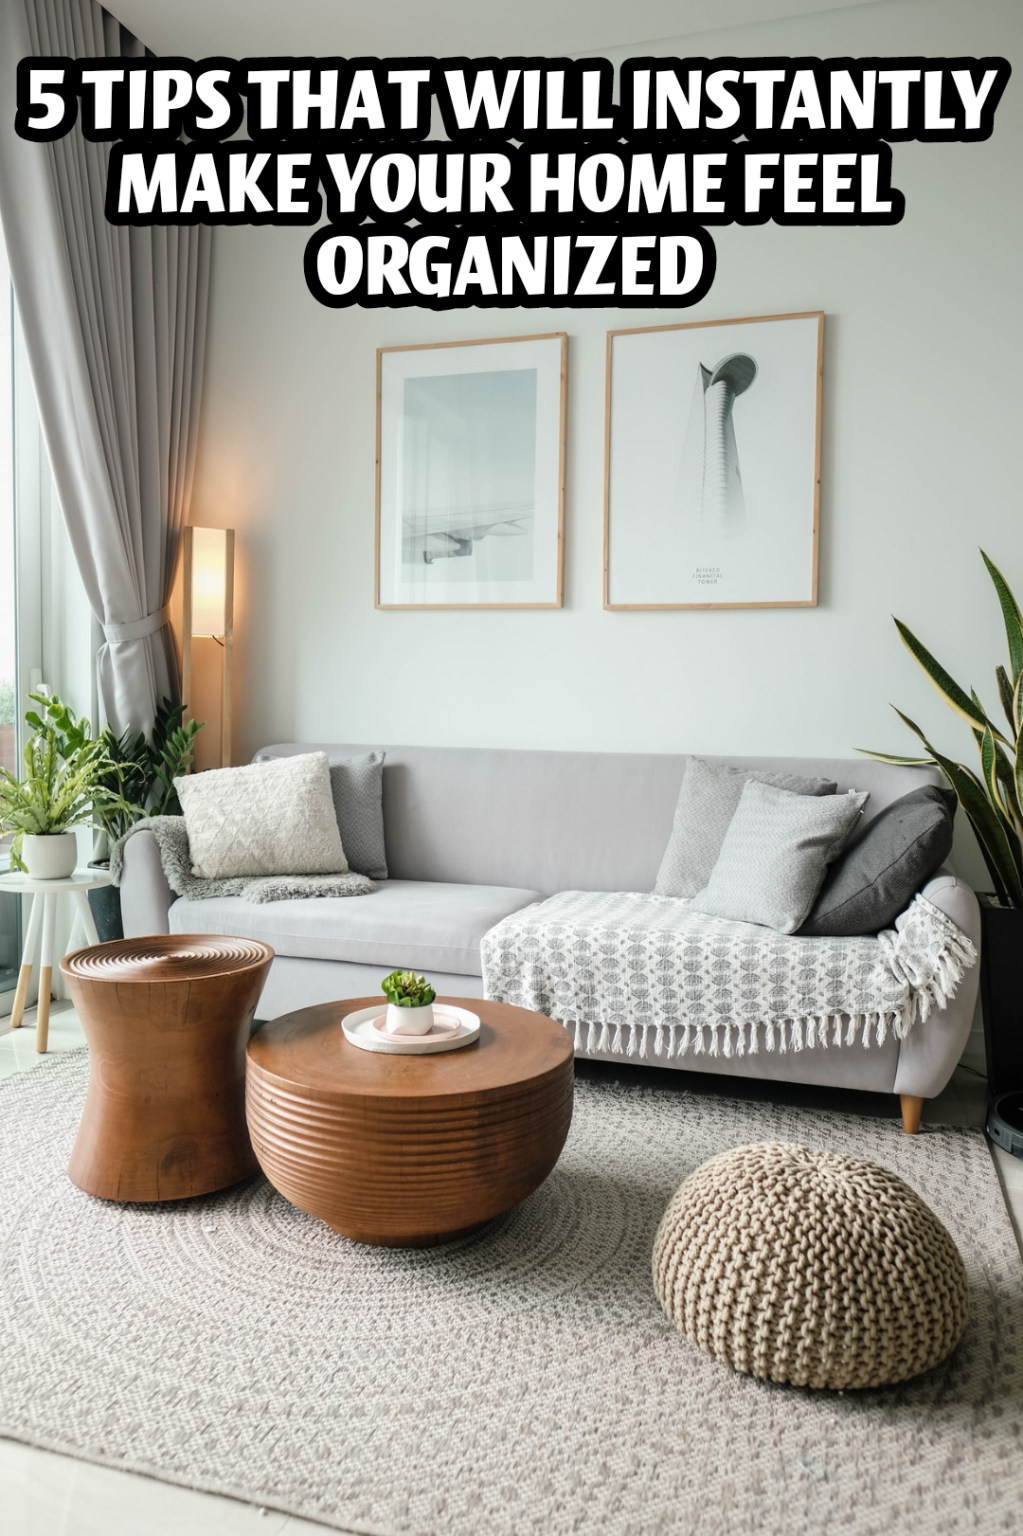 5 TIPS THAT WILL INSTANTLY MAKE YOUR HOME FEEL ORGANIZED